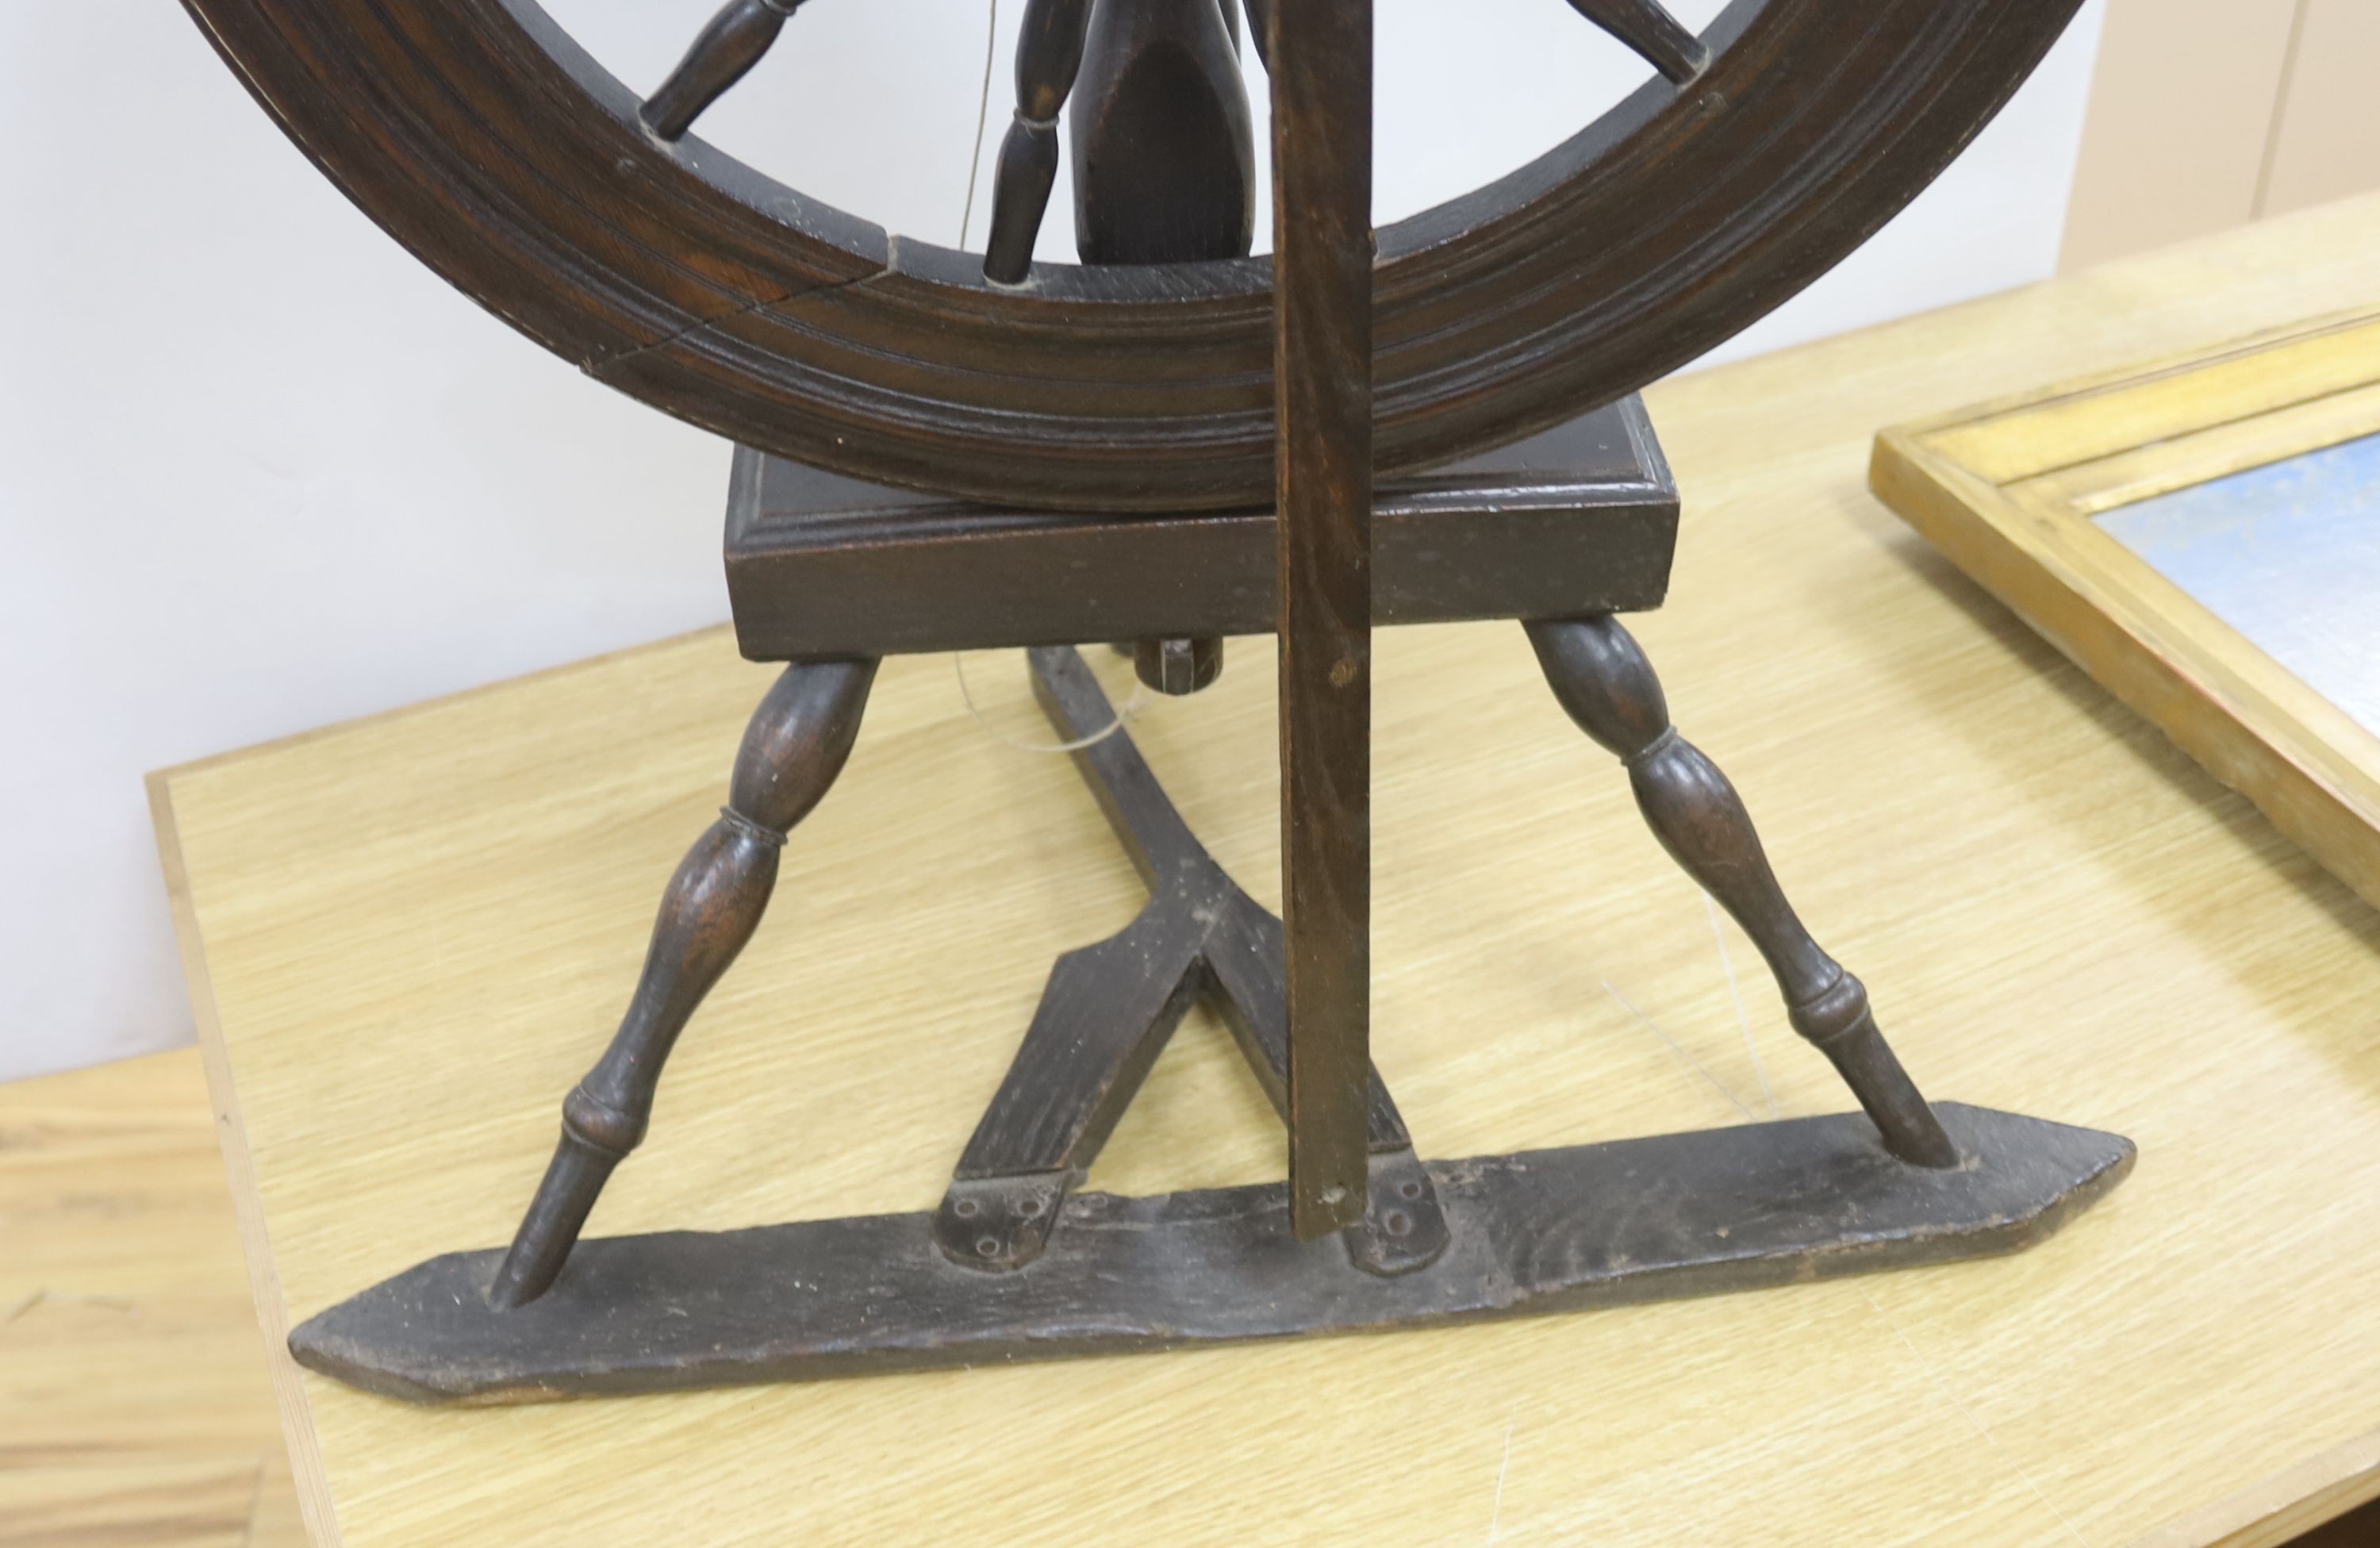 A 19th century beech and ash spinning wheel, 109 cm high